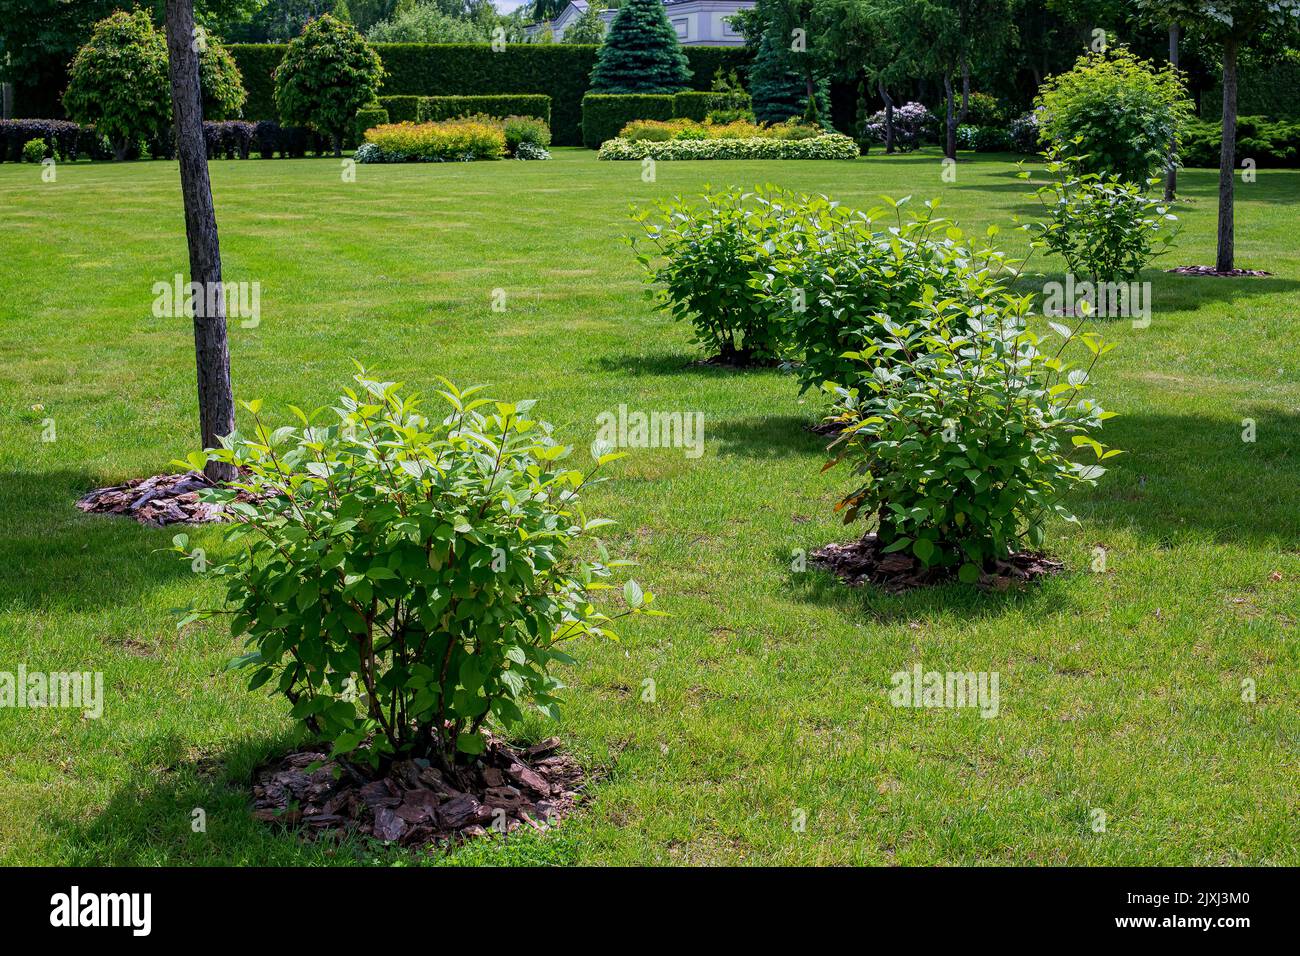 green deciduous bushes with mulching in backyard garden bed, landscaped park with mulching plants and meadow lawn in summer park with different plants Stock Photo